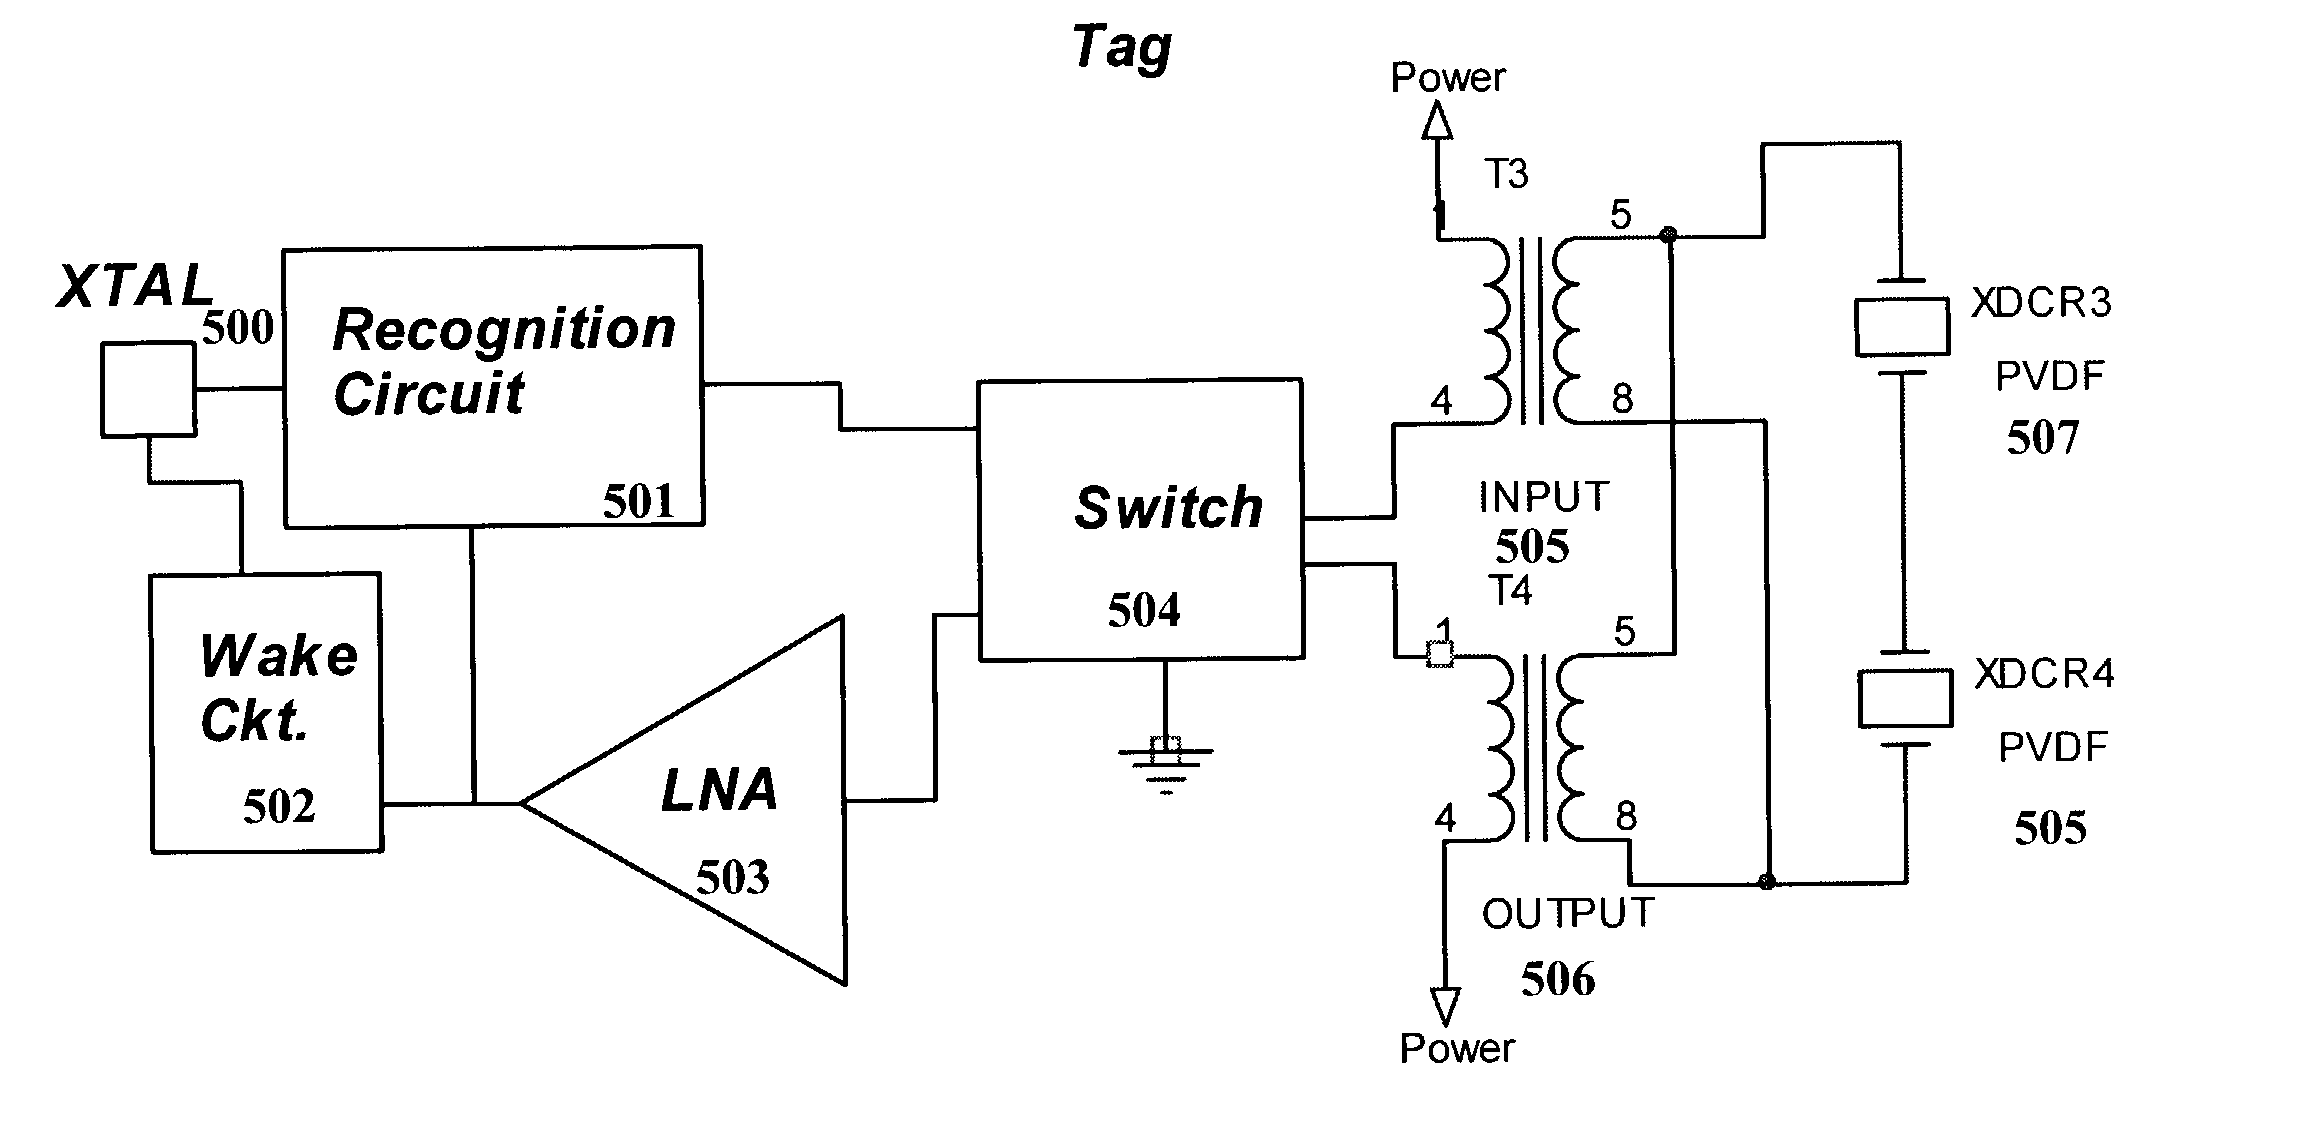 Ultrasonic transmitter and receiver systems and products using the same